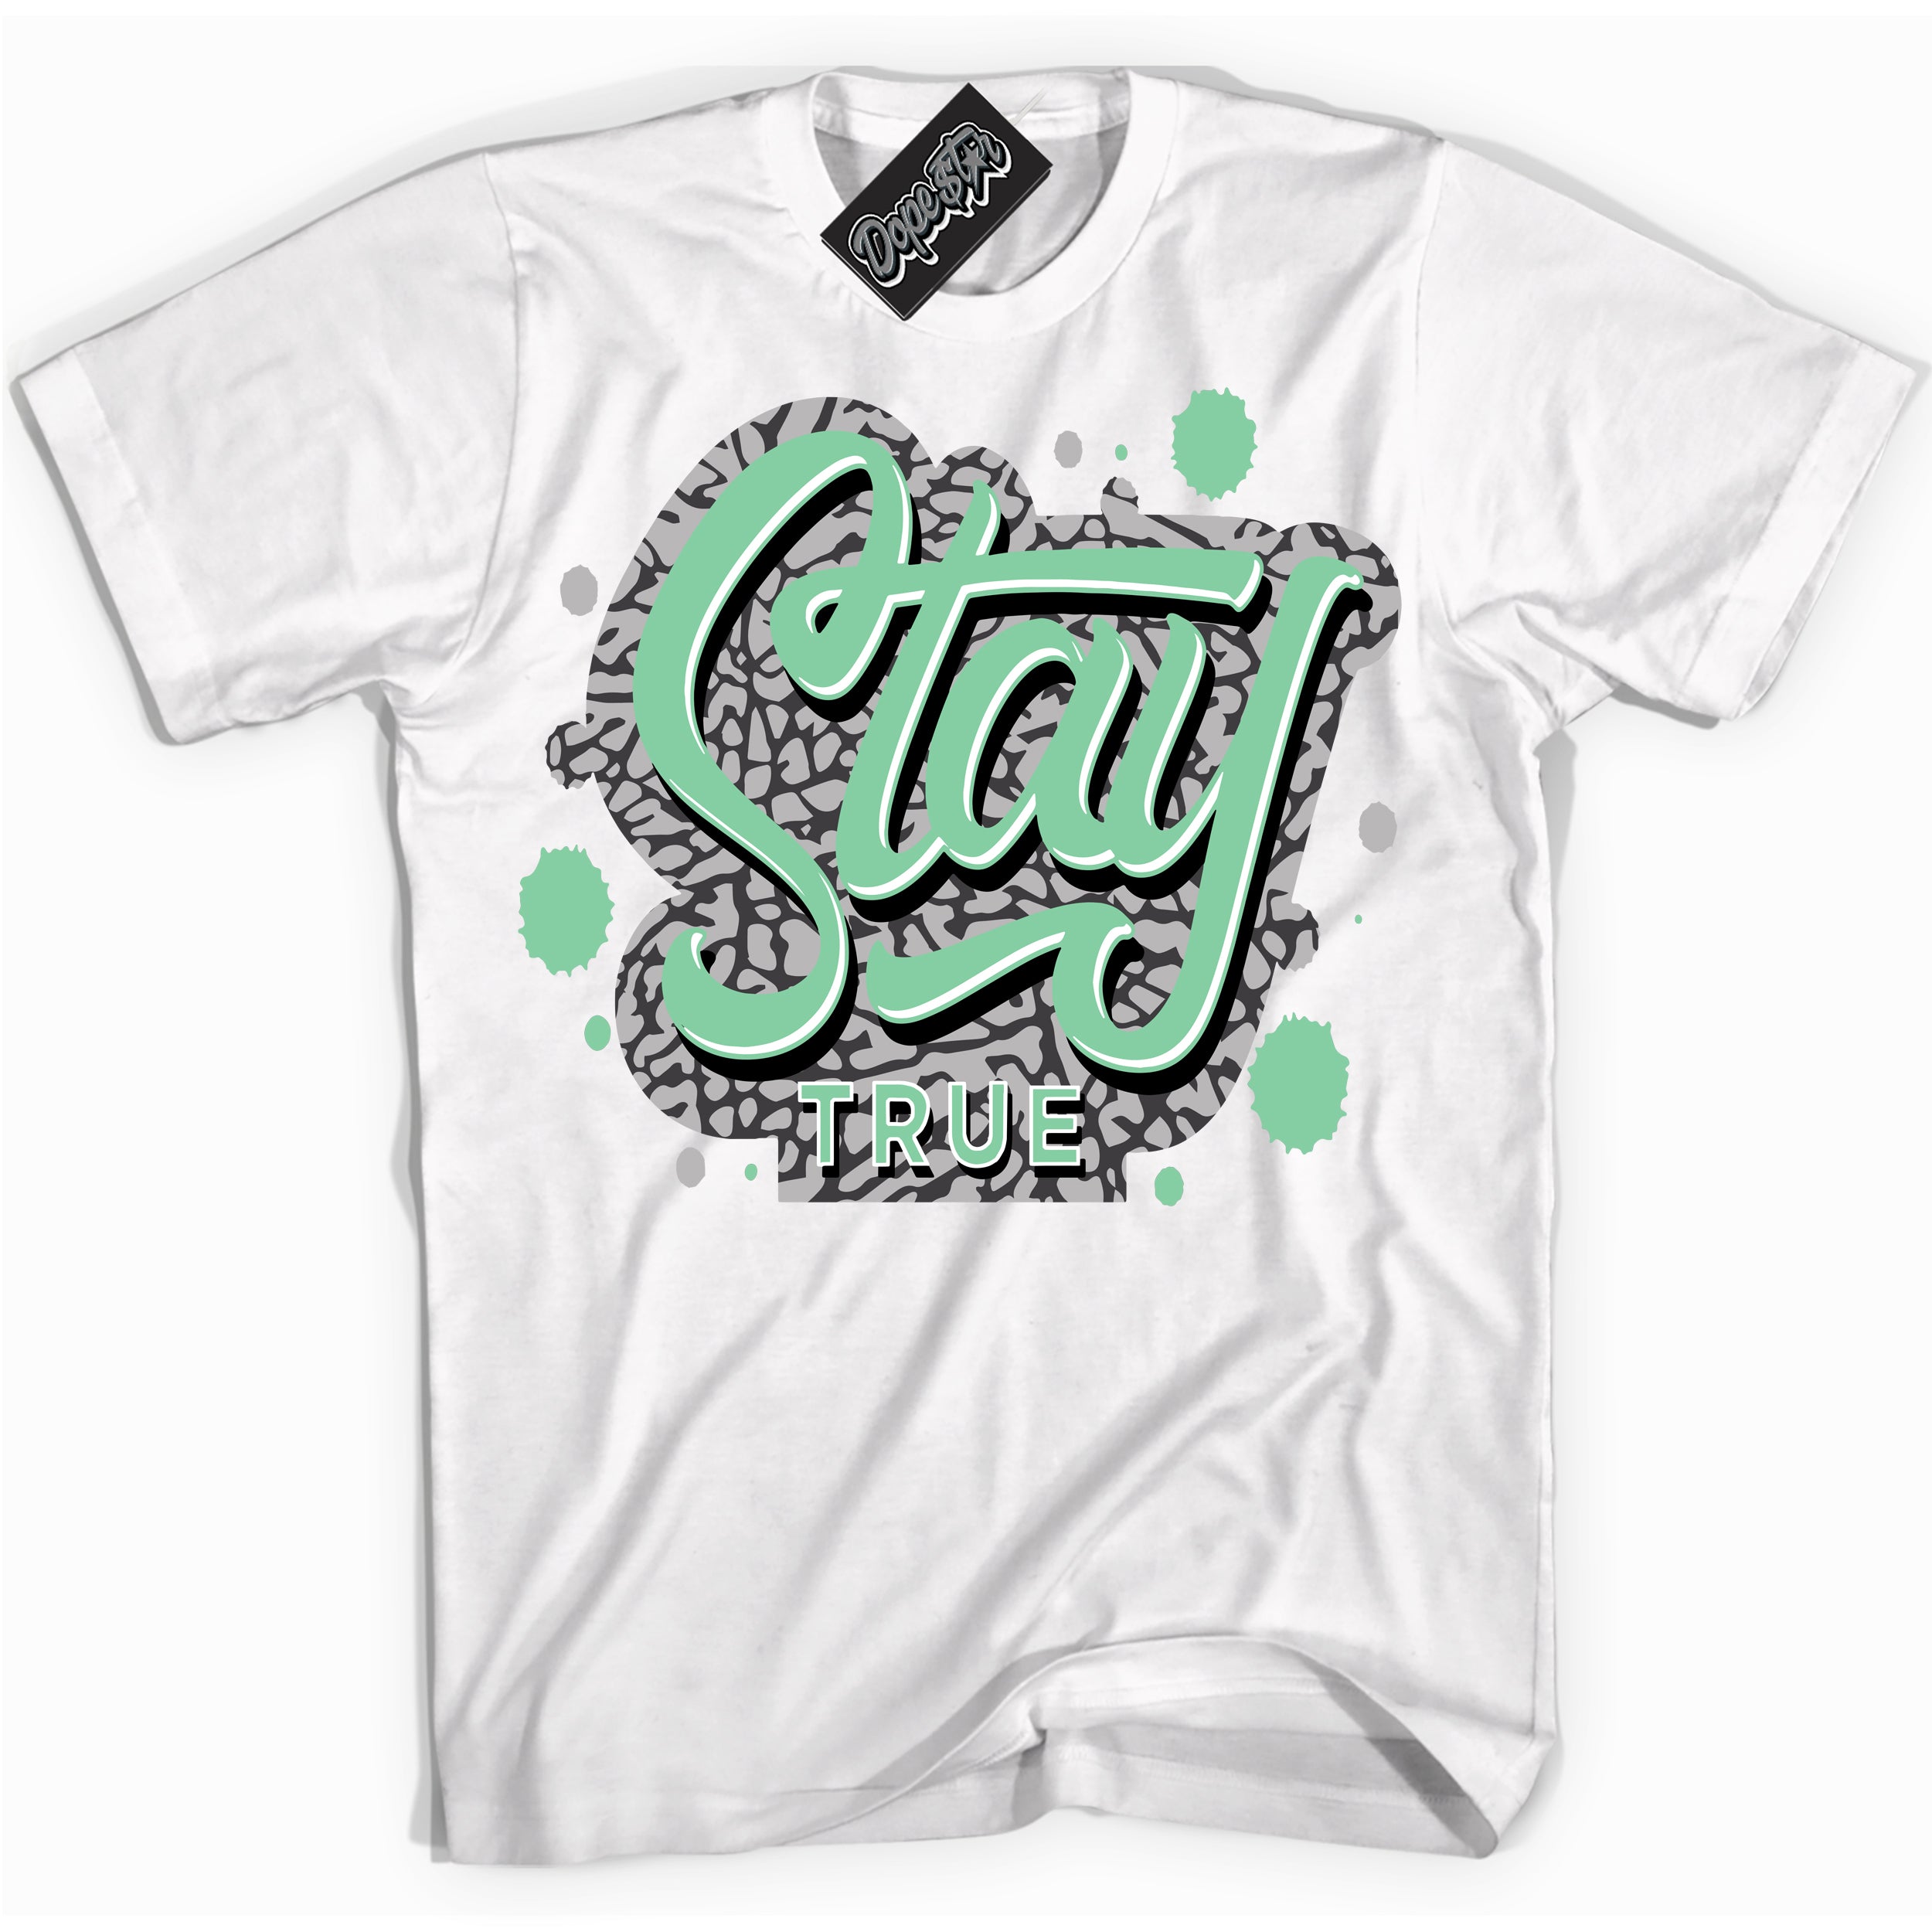 Cool White graphic tee with “ Stay True ” design, that perfectly matches Green Glow 3s sneakers 